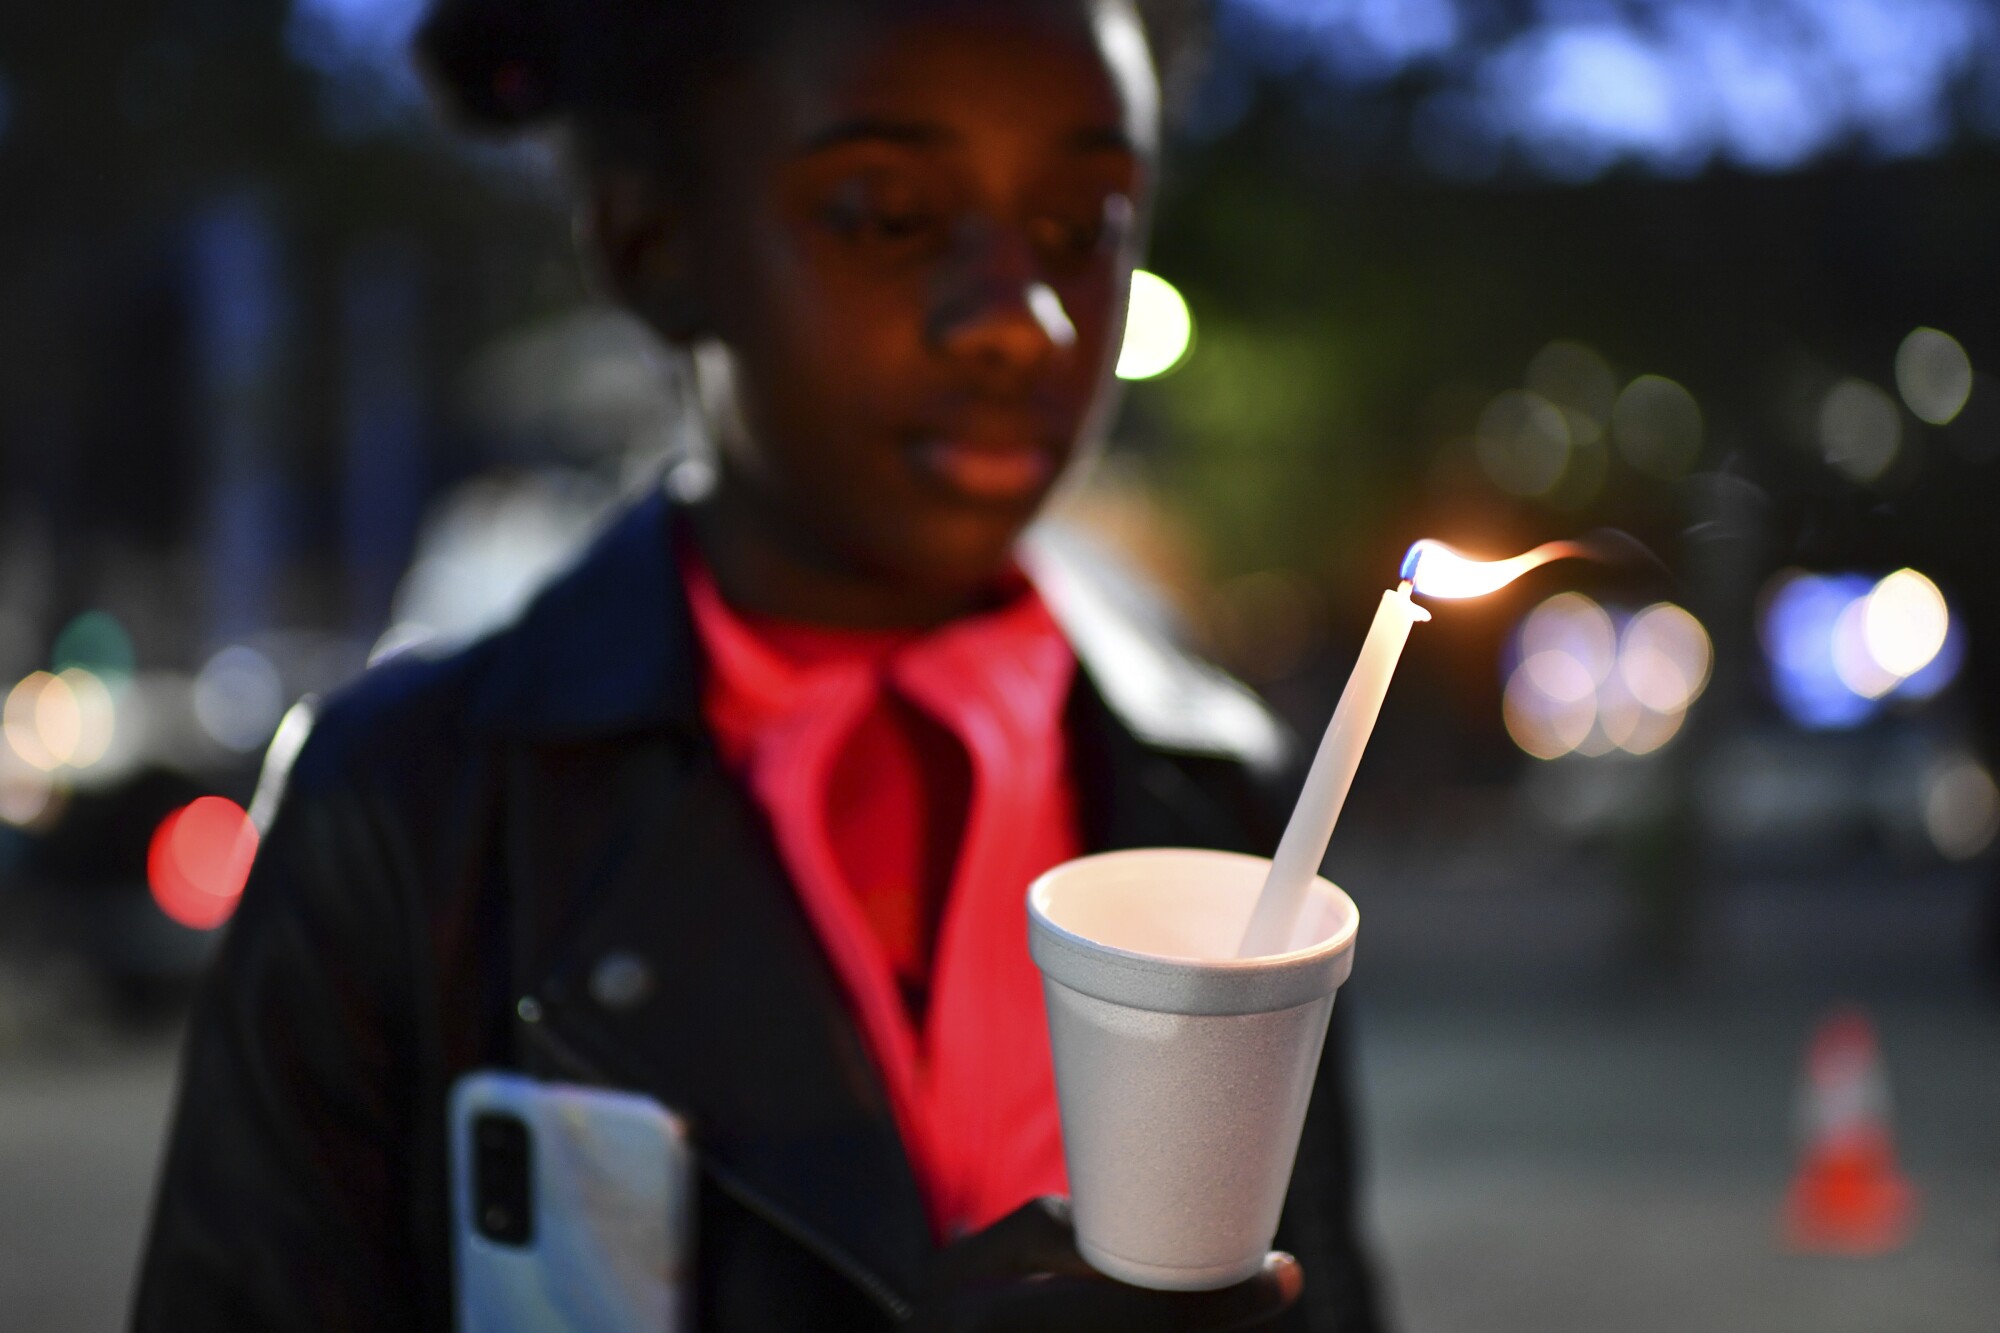 Gabrielle Knox, 9, of Sacramento, stares at the flame of a candle during a vigil held at Ali Youssefi Square in Sacramento